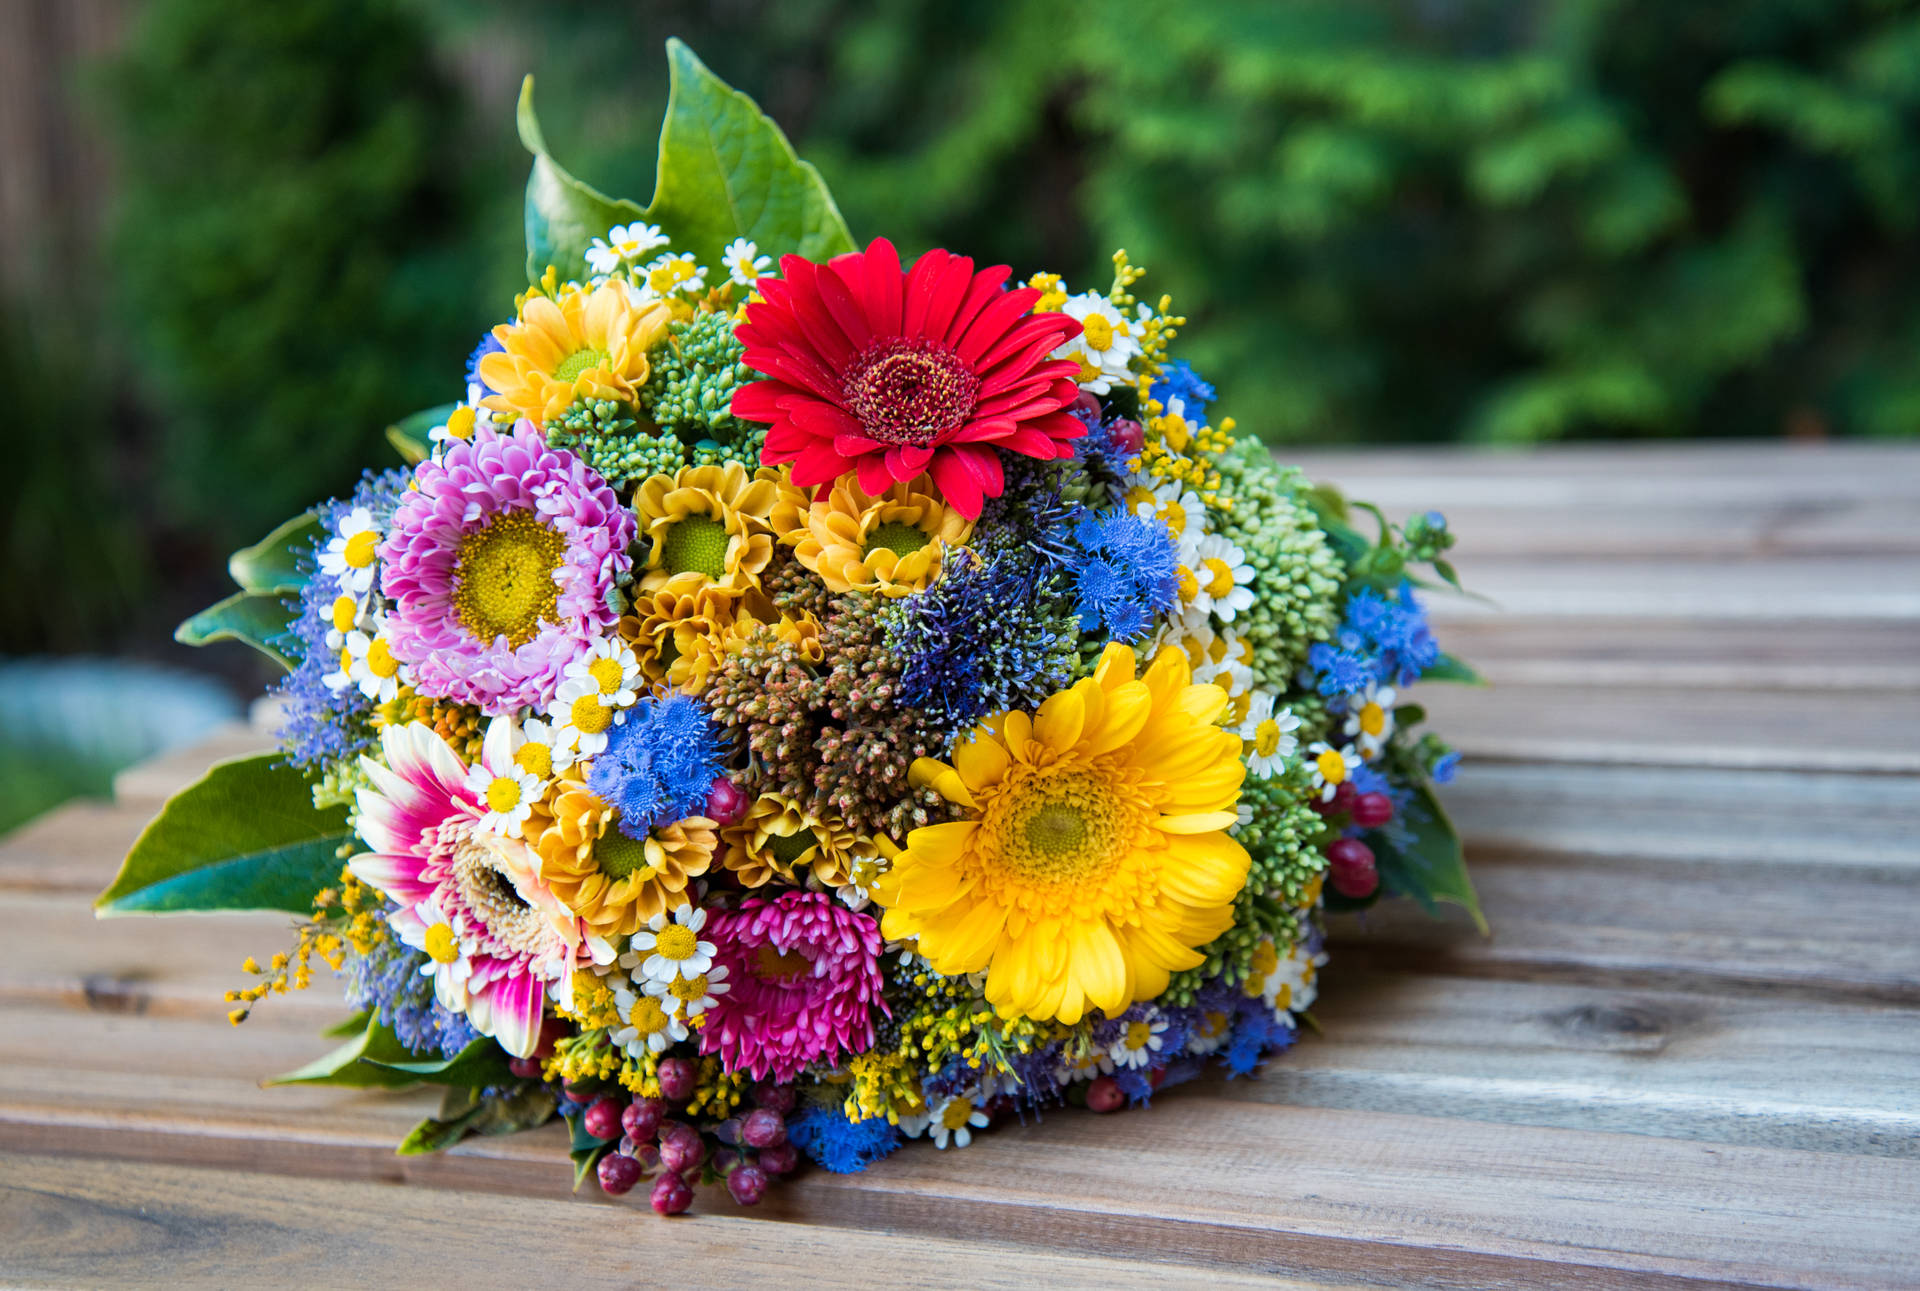 World's Most Beautiful Flowers Colourful Bouquet